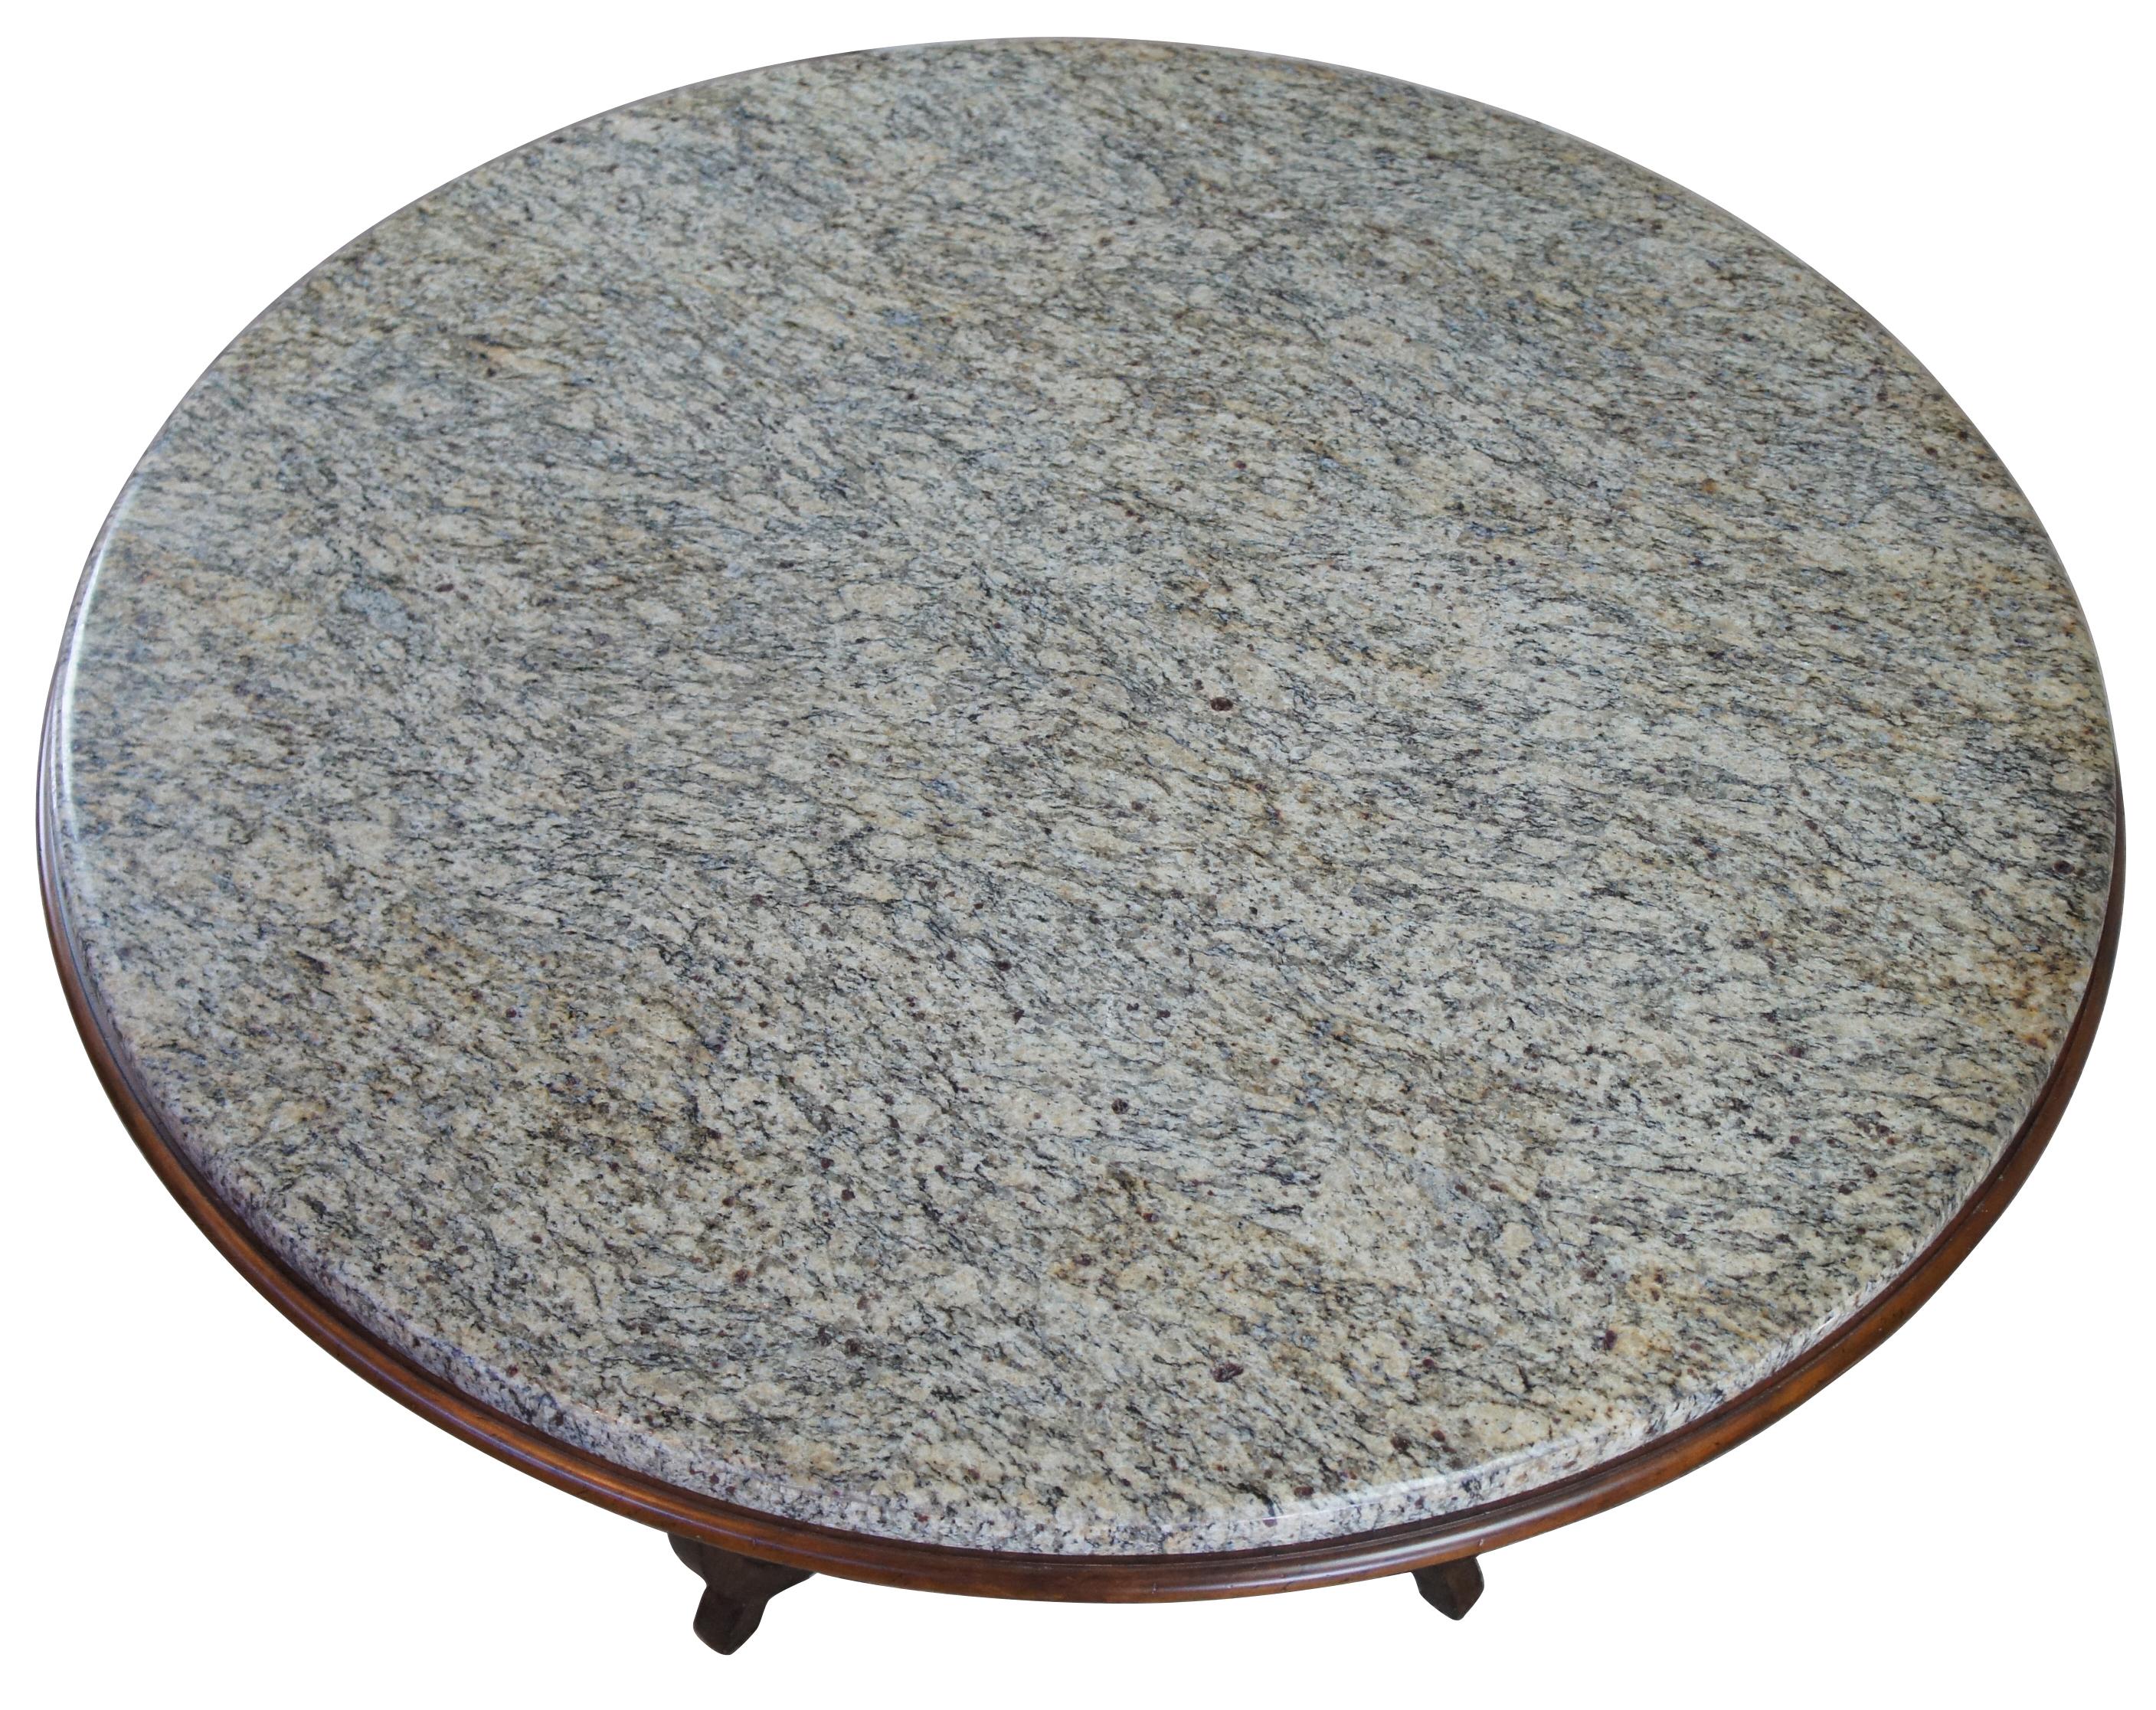 drexel round dining table